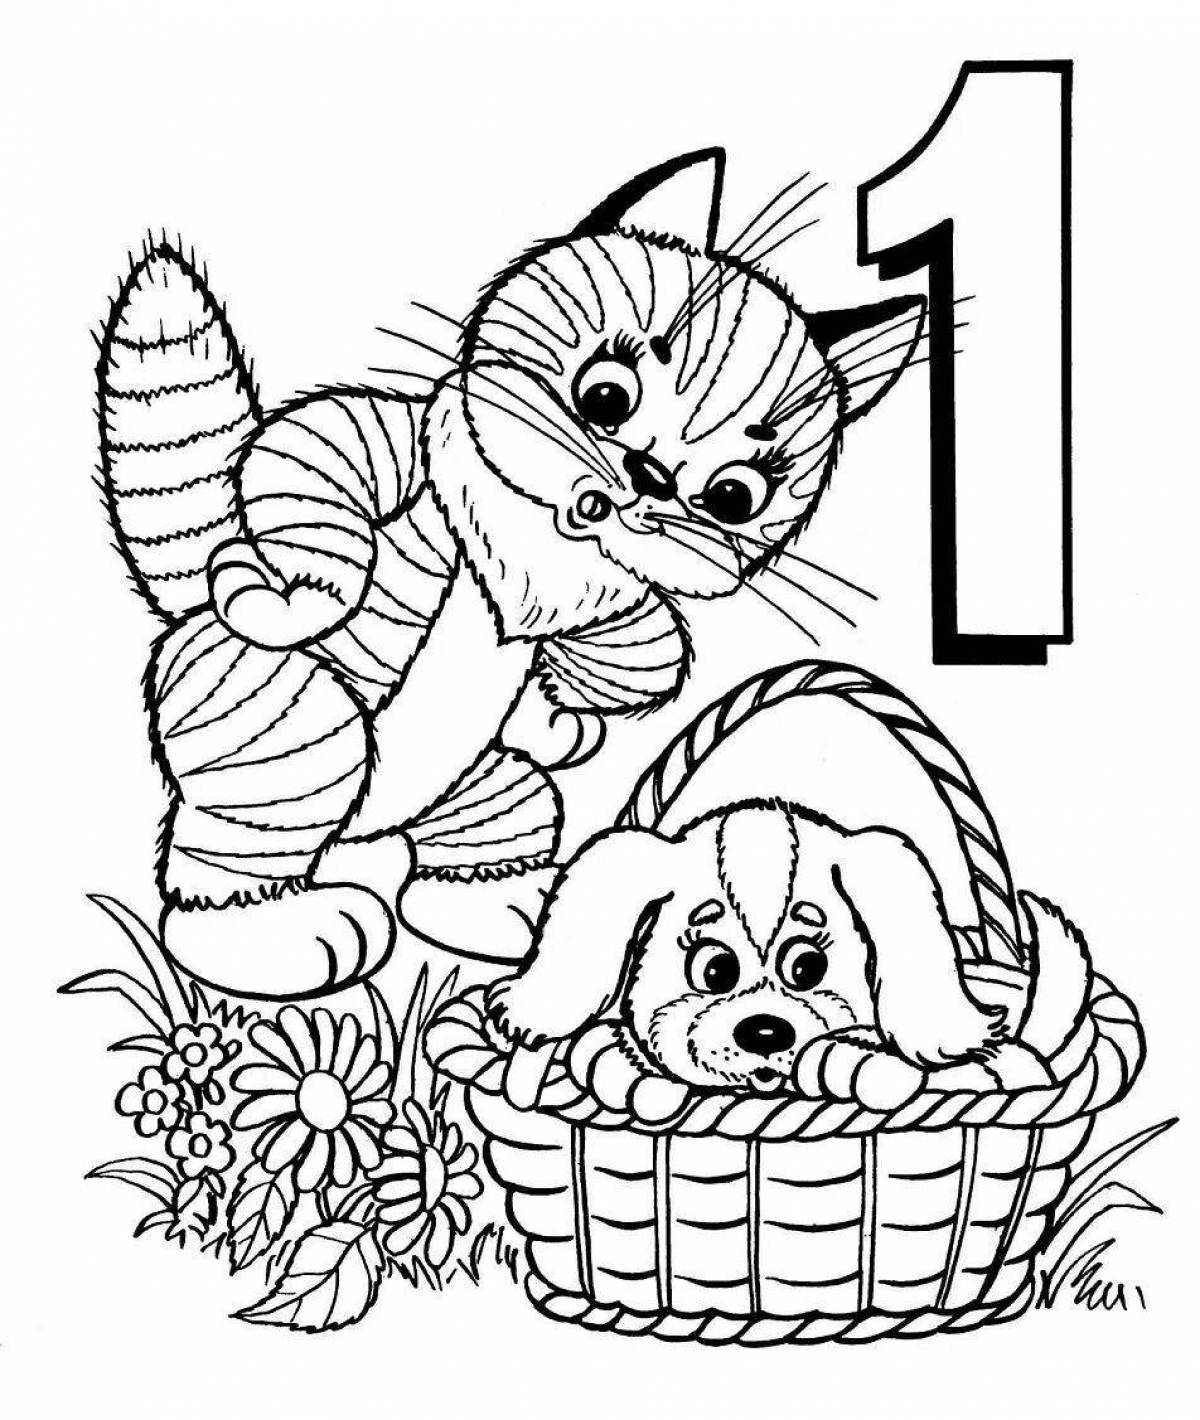 Wonderful cat house coloring book for kids